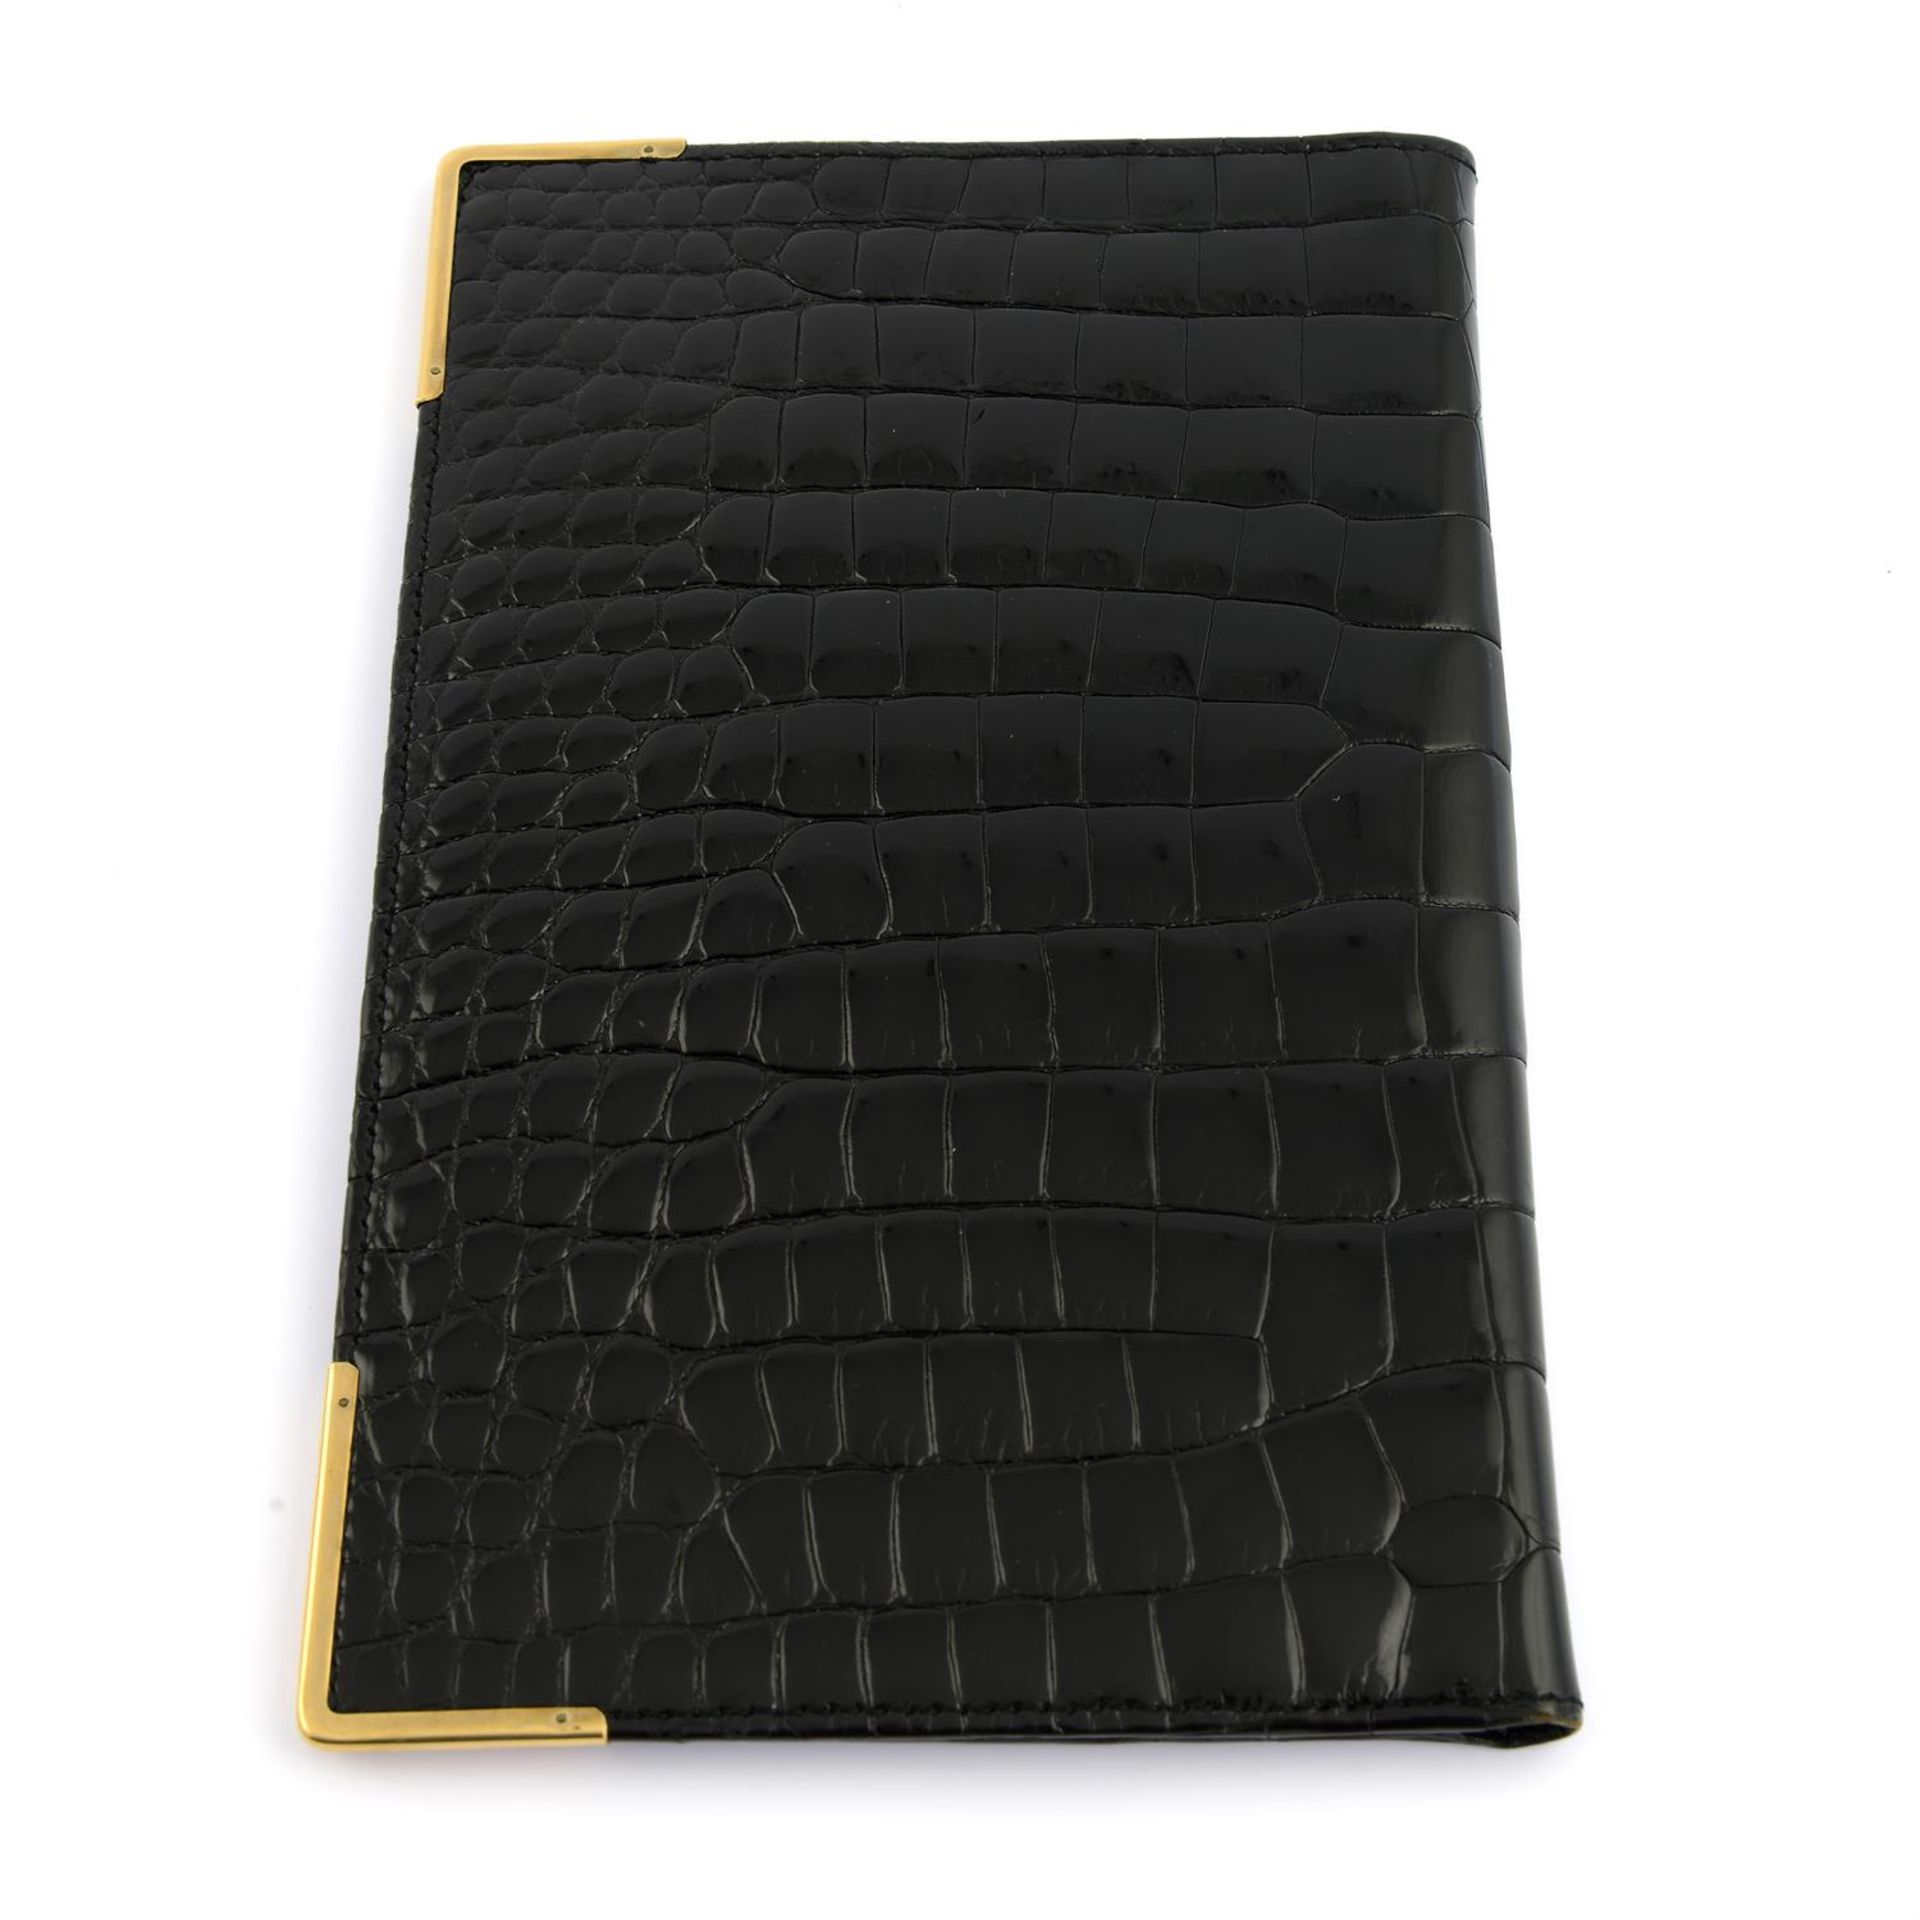 ASPREY - a black patent Crocodile leather wallet with 9ct gold mounted edges. - Image 2 of 4